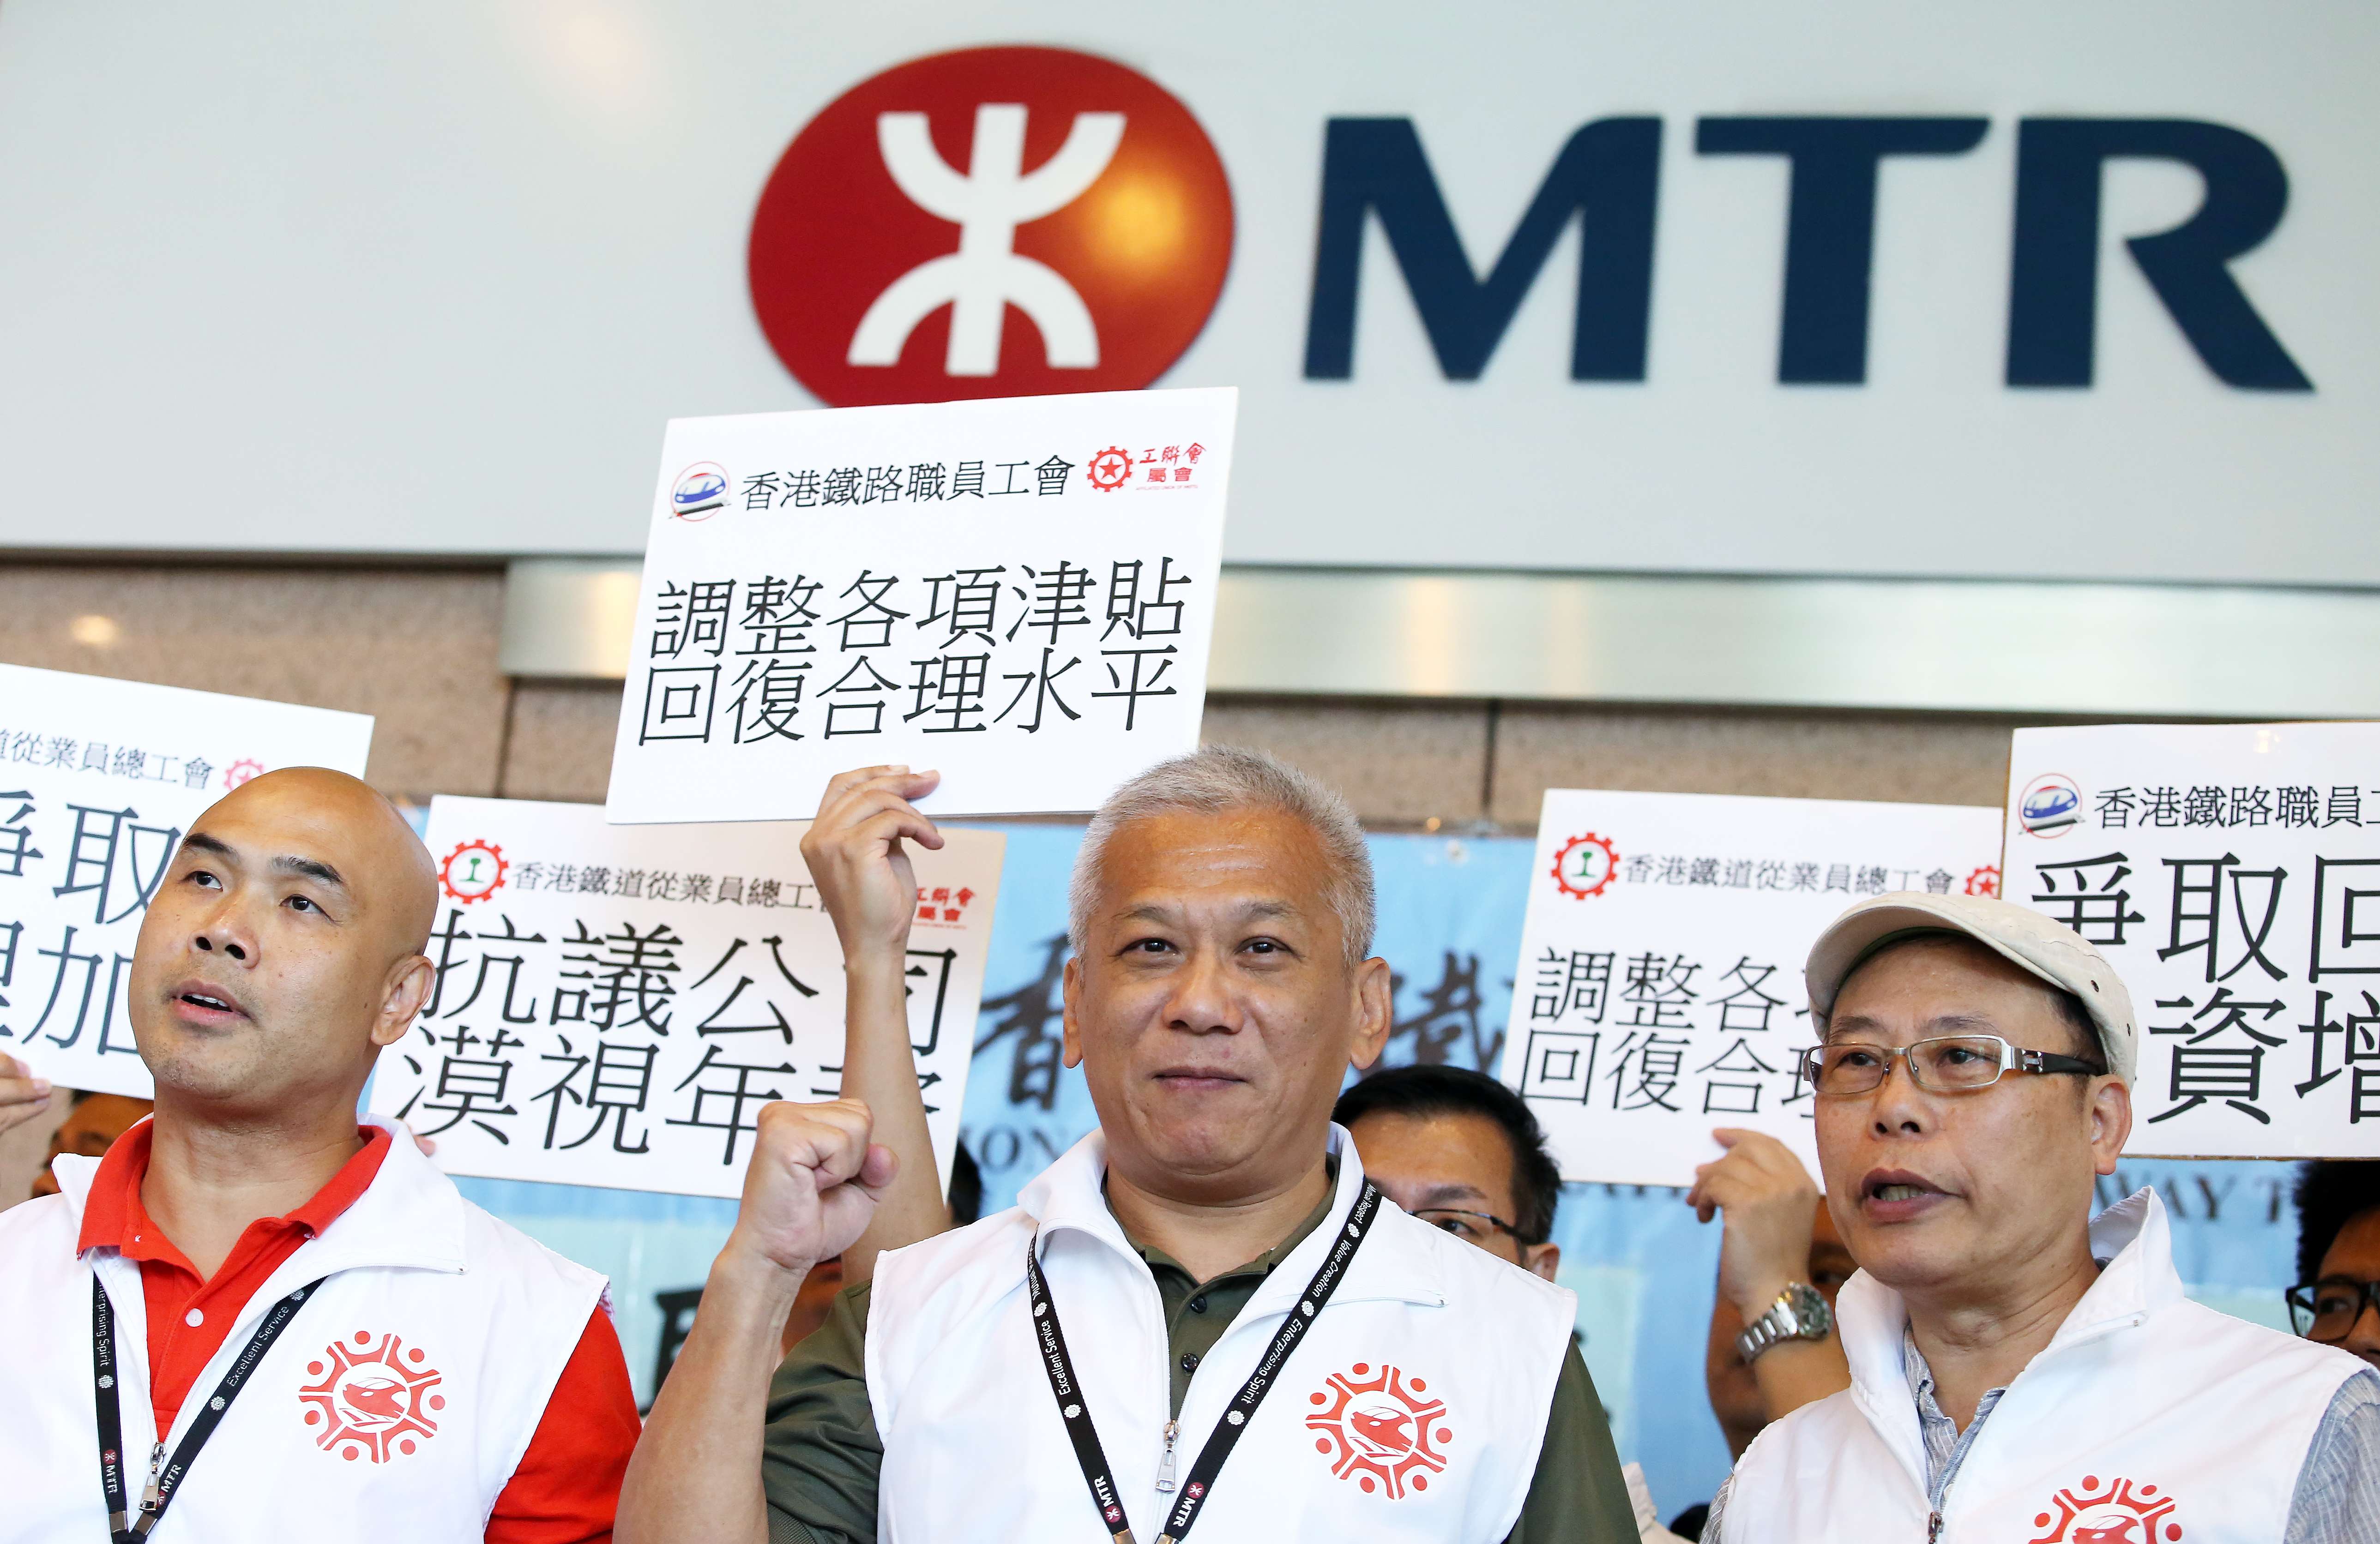 Federation of Railway Trade Unions members protest outside the MTR Corp’s headquarters in Kowloon Bay. Photo: Nora Tam